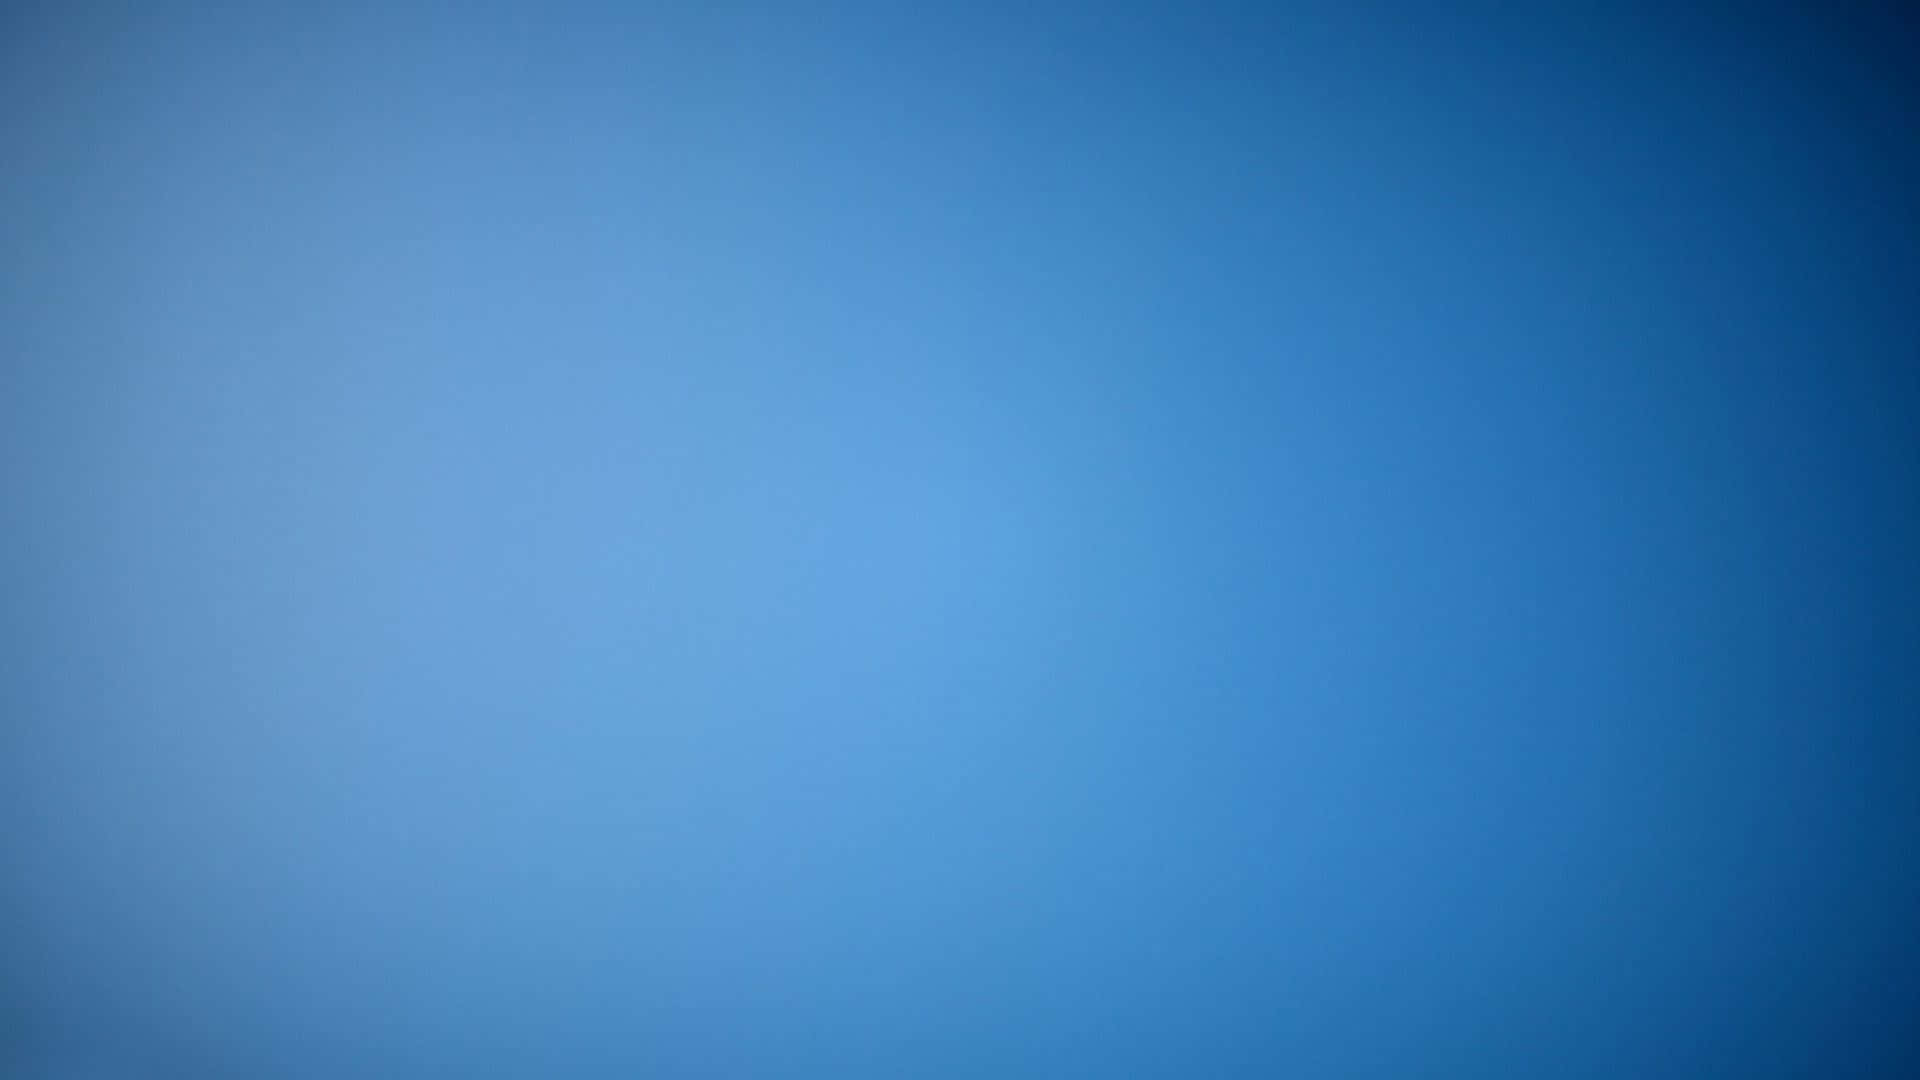 Neat Royal Blue Gradient Background